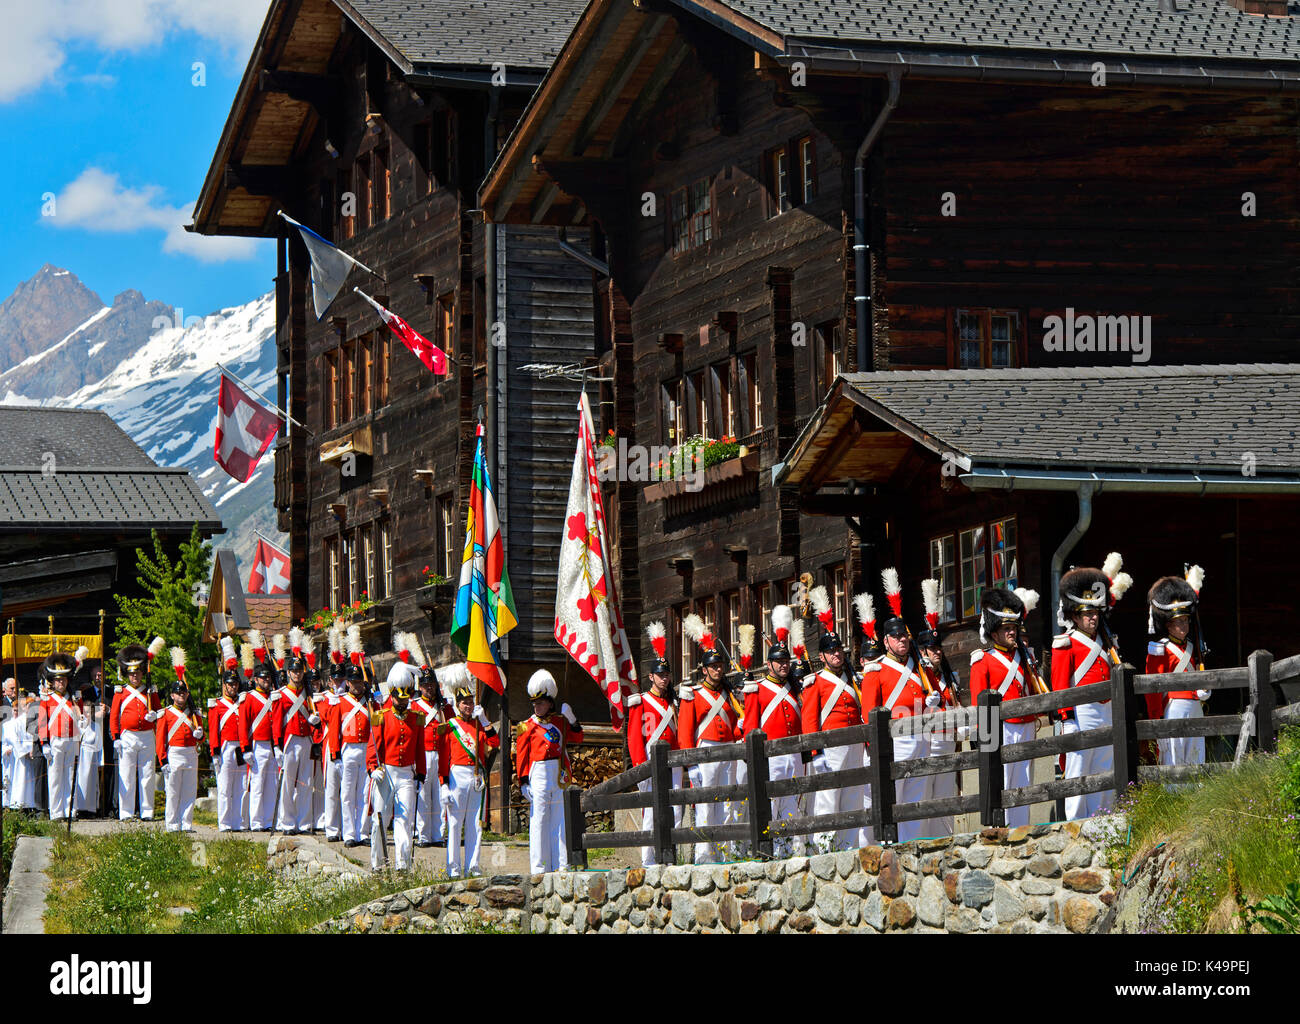 Grenadiers Of Our Lord At The Corpus Christi Procession, Blatten, Lötschental, Valais, Switzerland Stock Photo